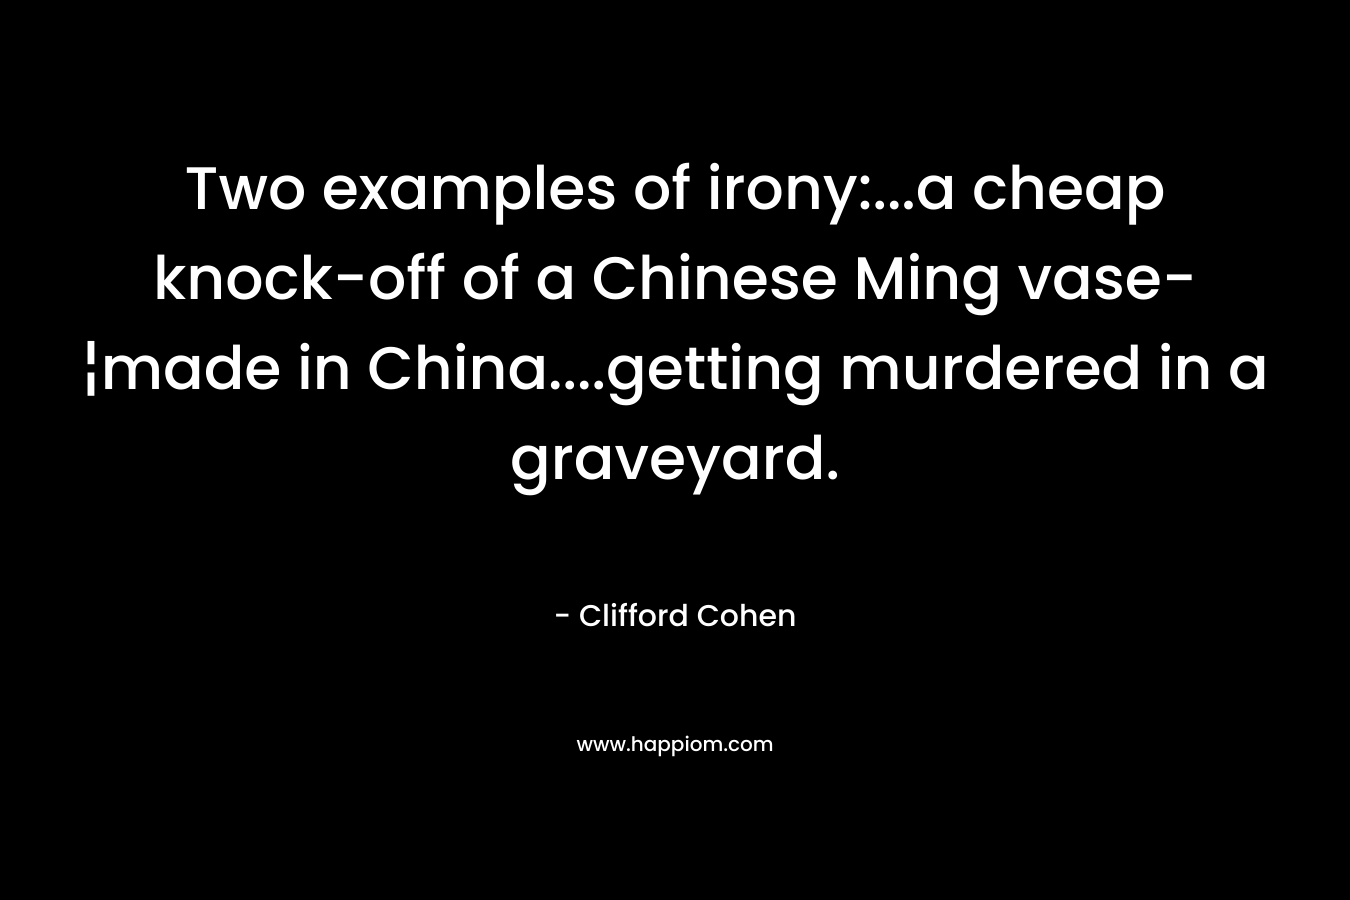 Two examples of irony:...a cheap knock-off of a Chinese Ming vase-¦made in China....getting murdered in a graveyard.